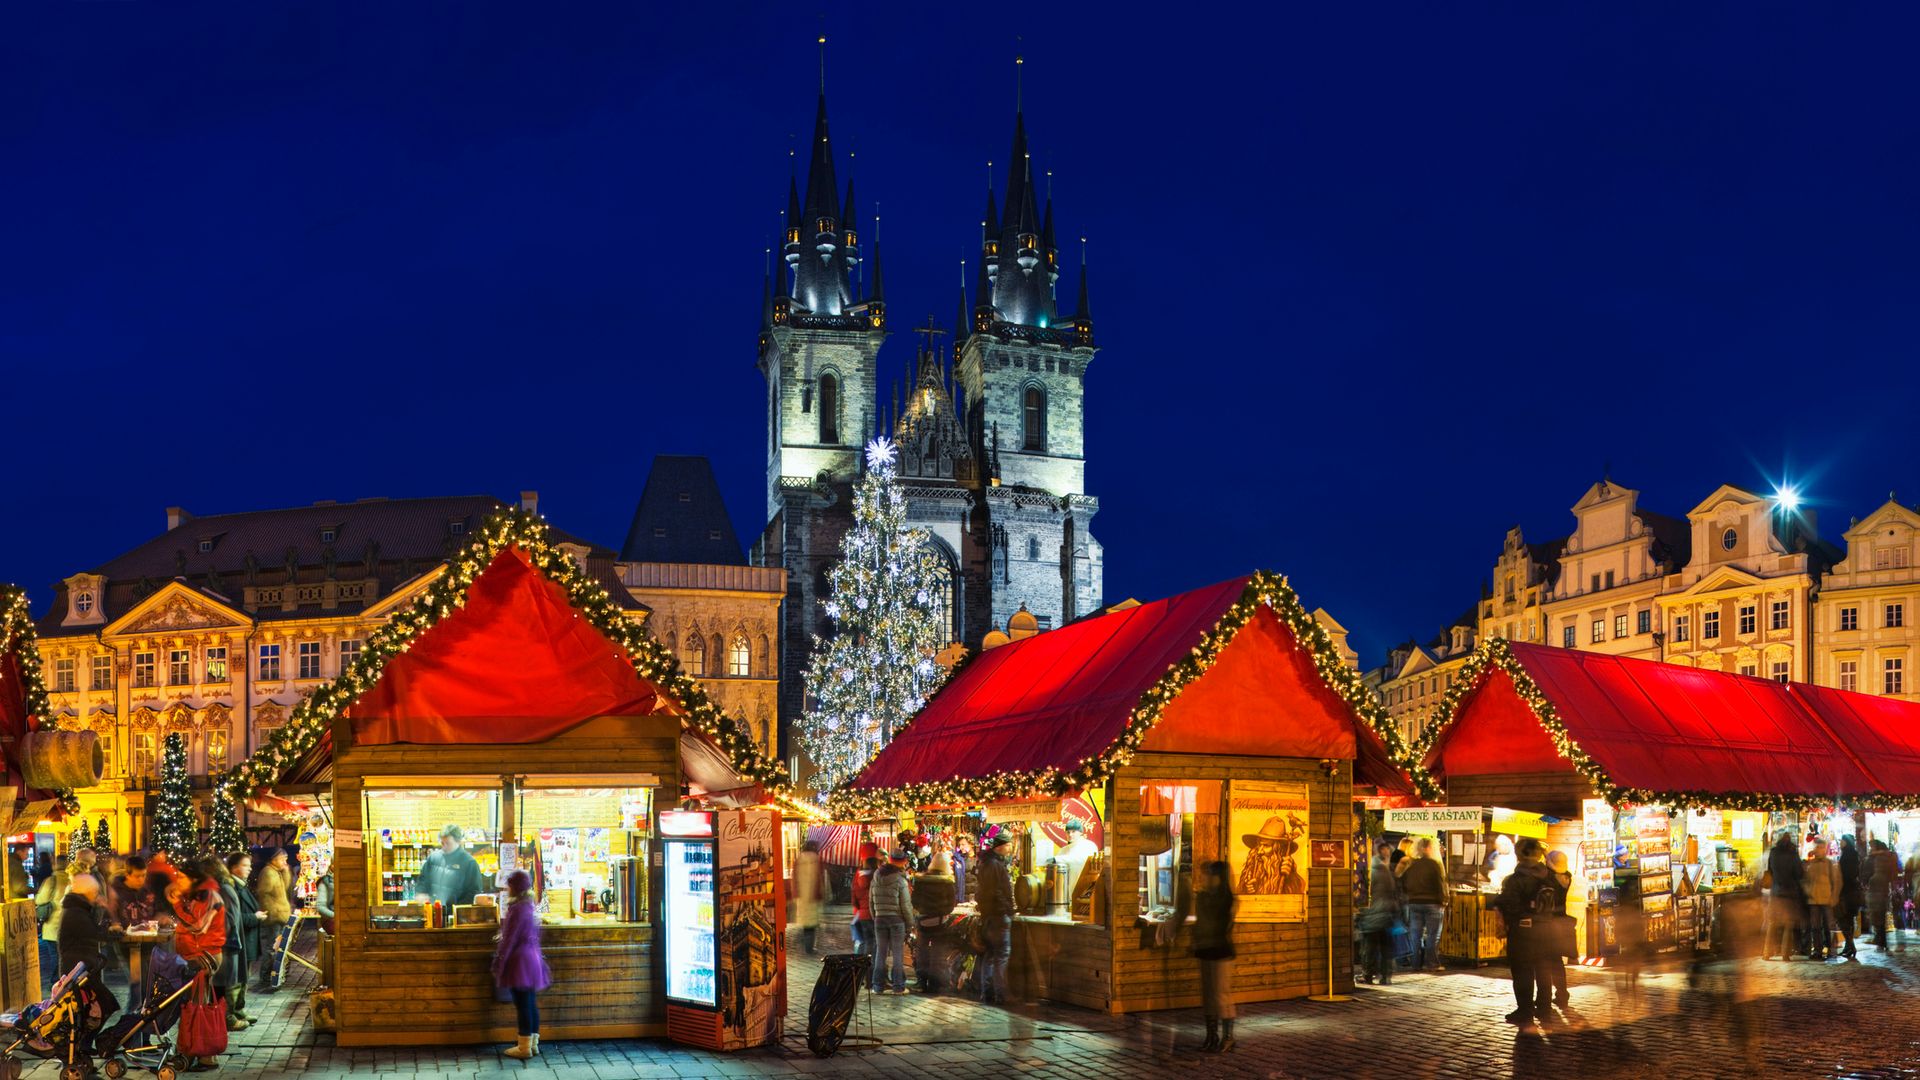 Europe has the finest Christmas markets